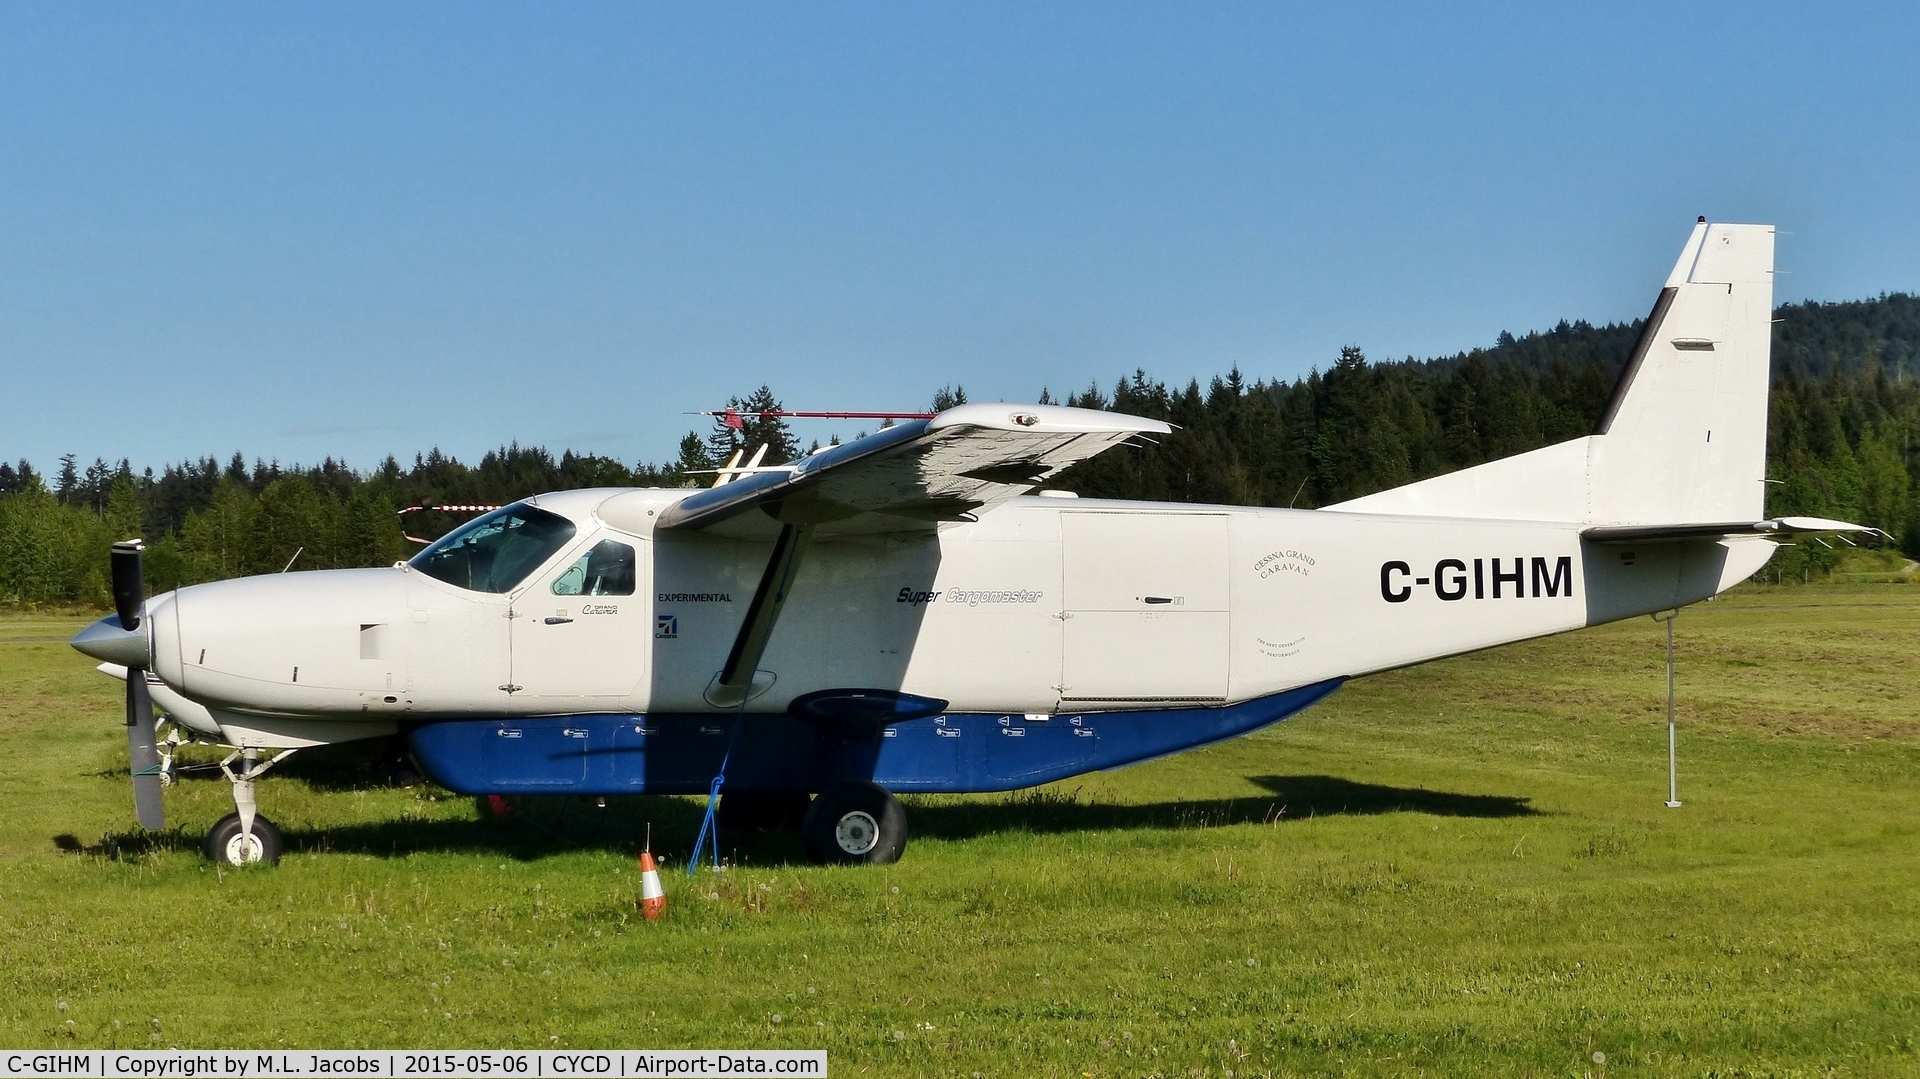 C-GIHM, 1988 Cessna 208B Super Cargomaster C/N 208B0118, Parked at Nanaimo airport.